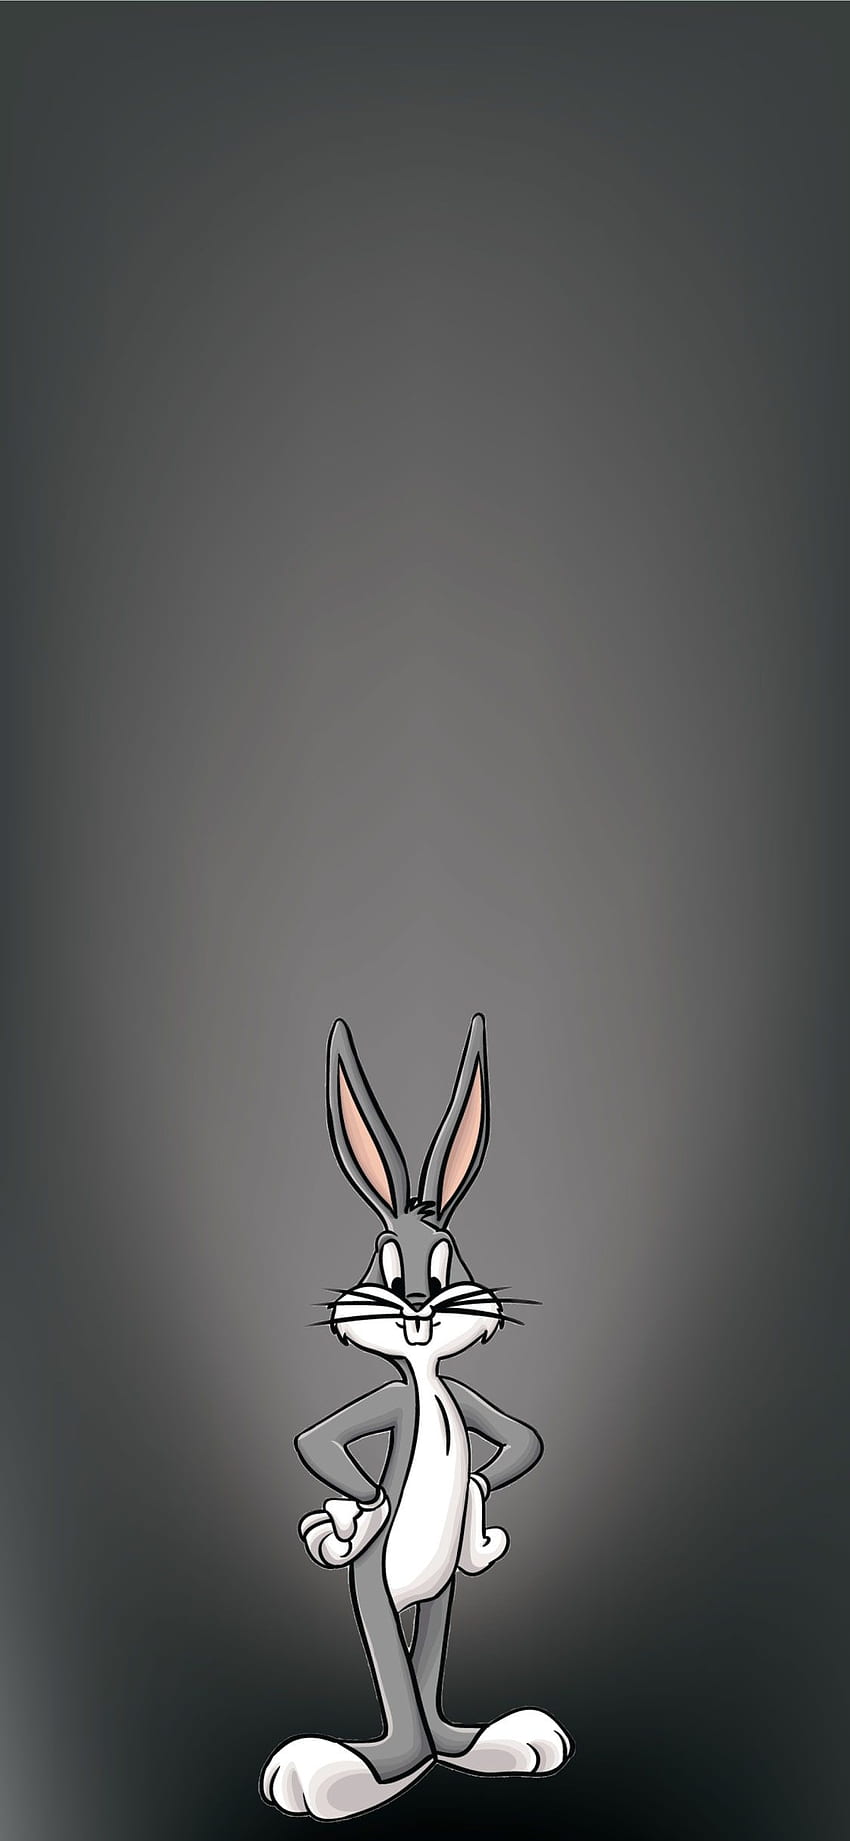 Bugs Bunny Space Jam A new Legacy Wallpaper 8k Ultra HD ID7576